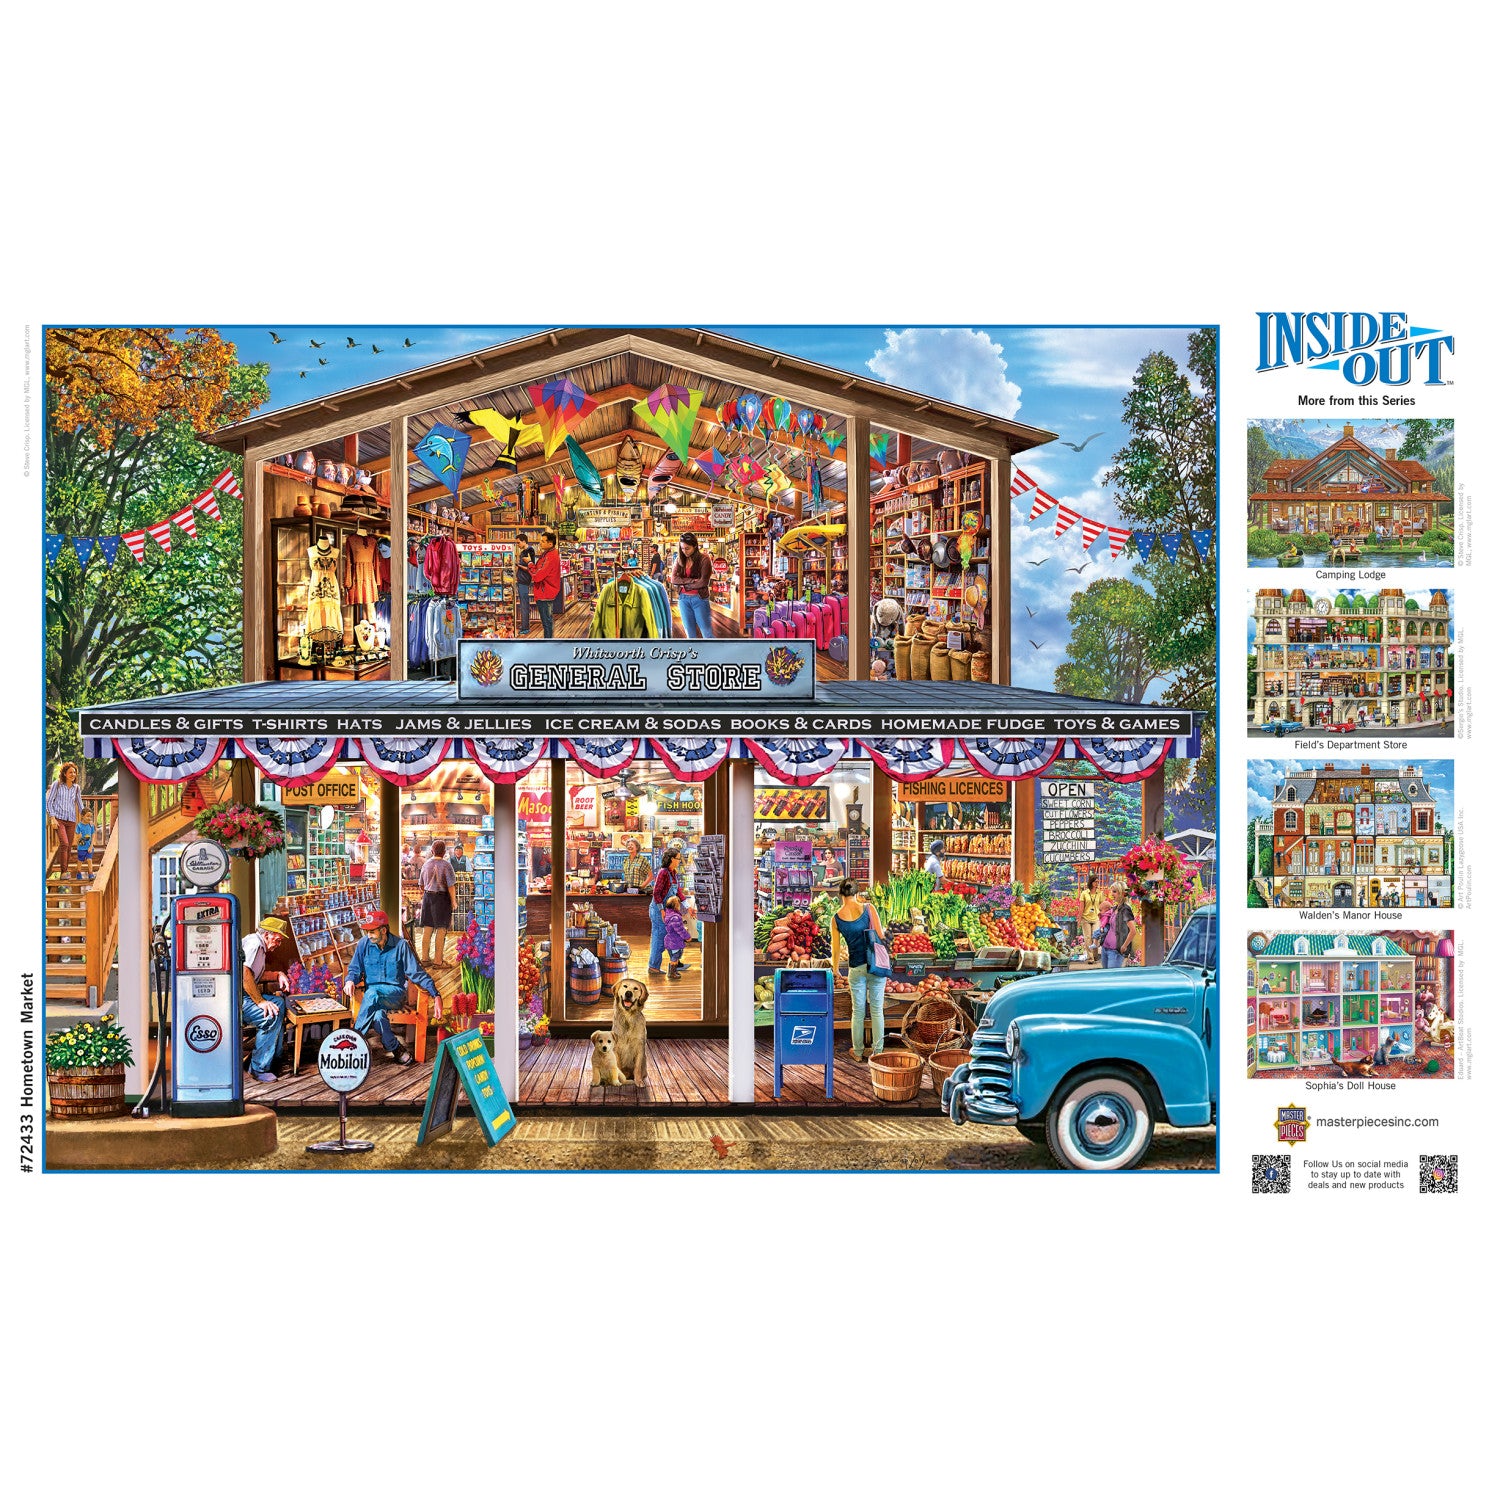 Inside Out - Hometown Market 1000 Piece Jigsaw Puzzle